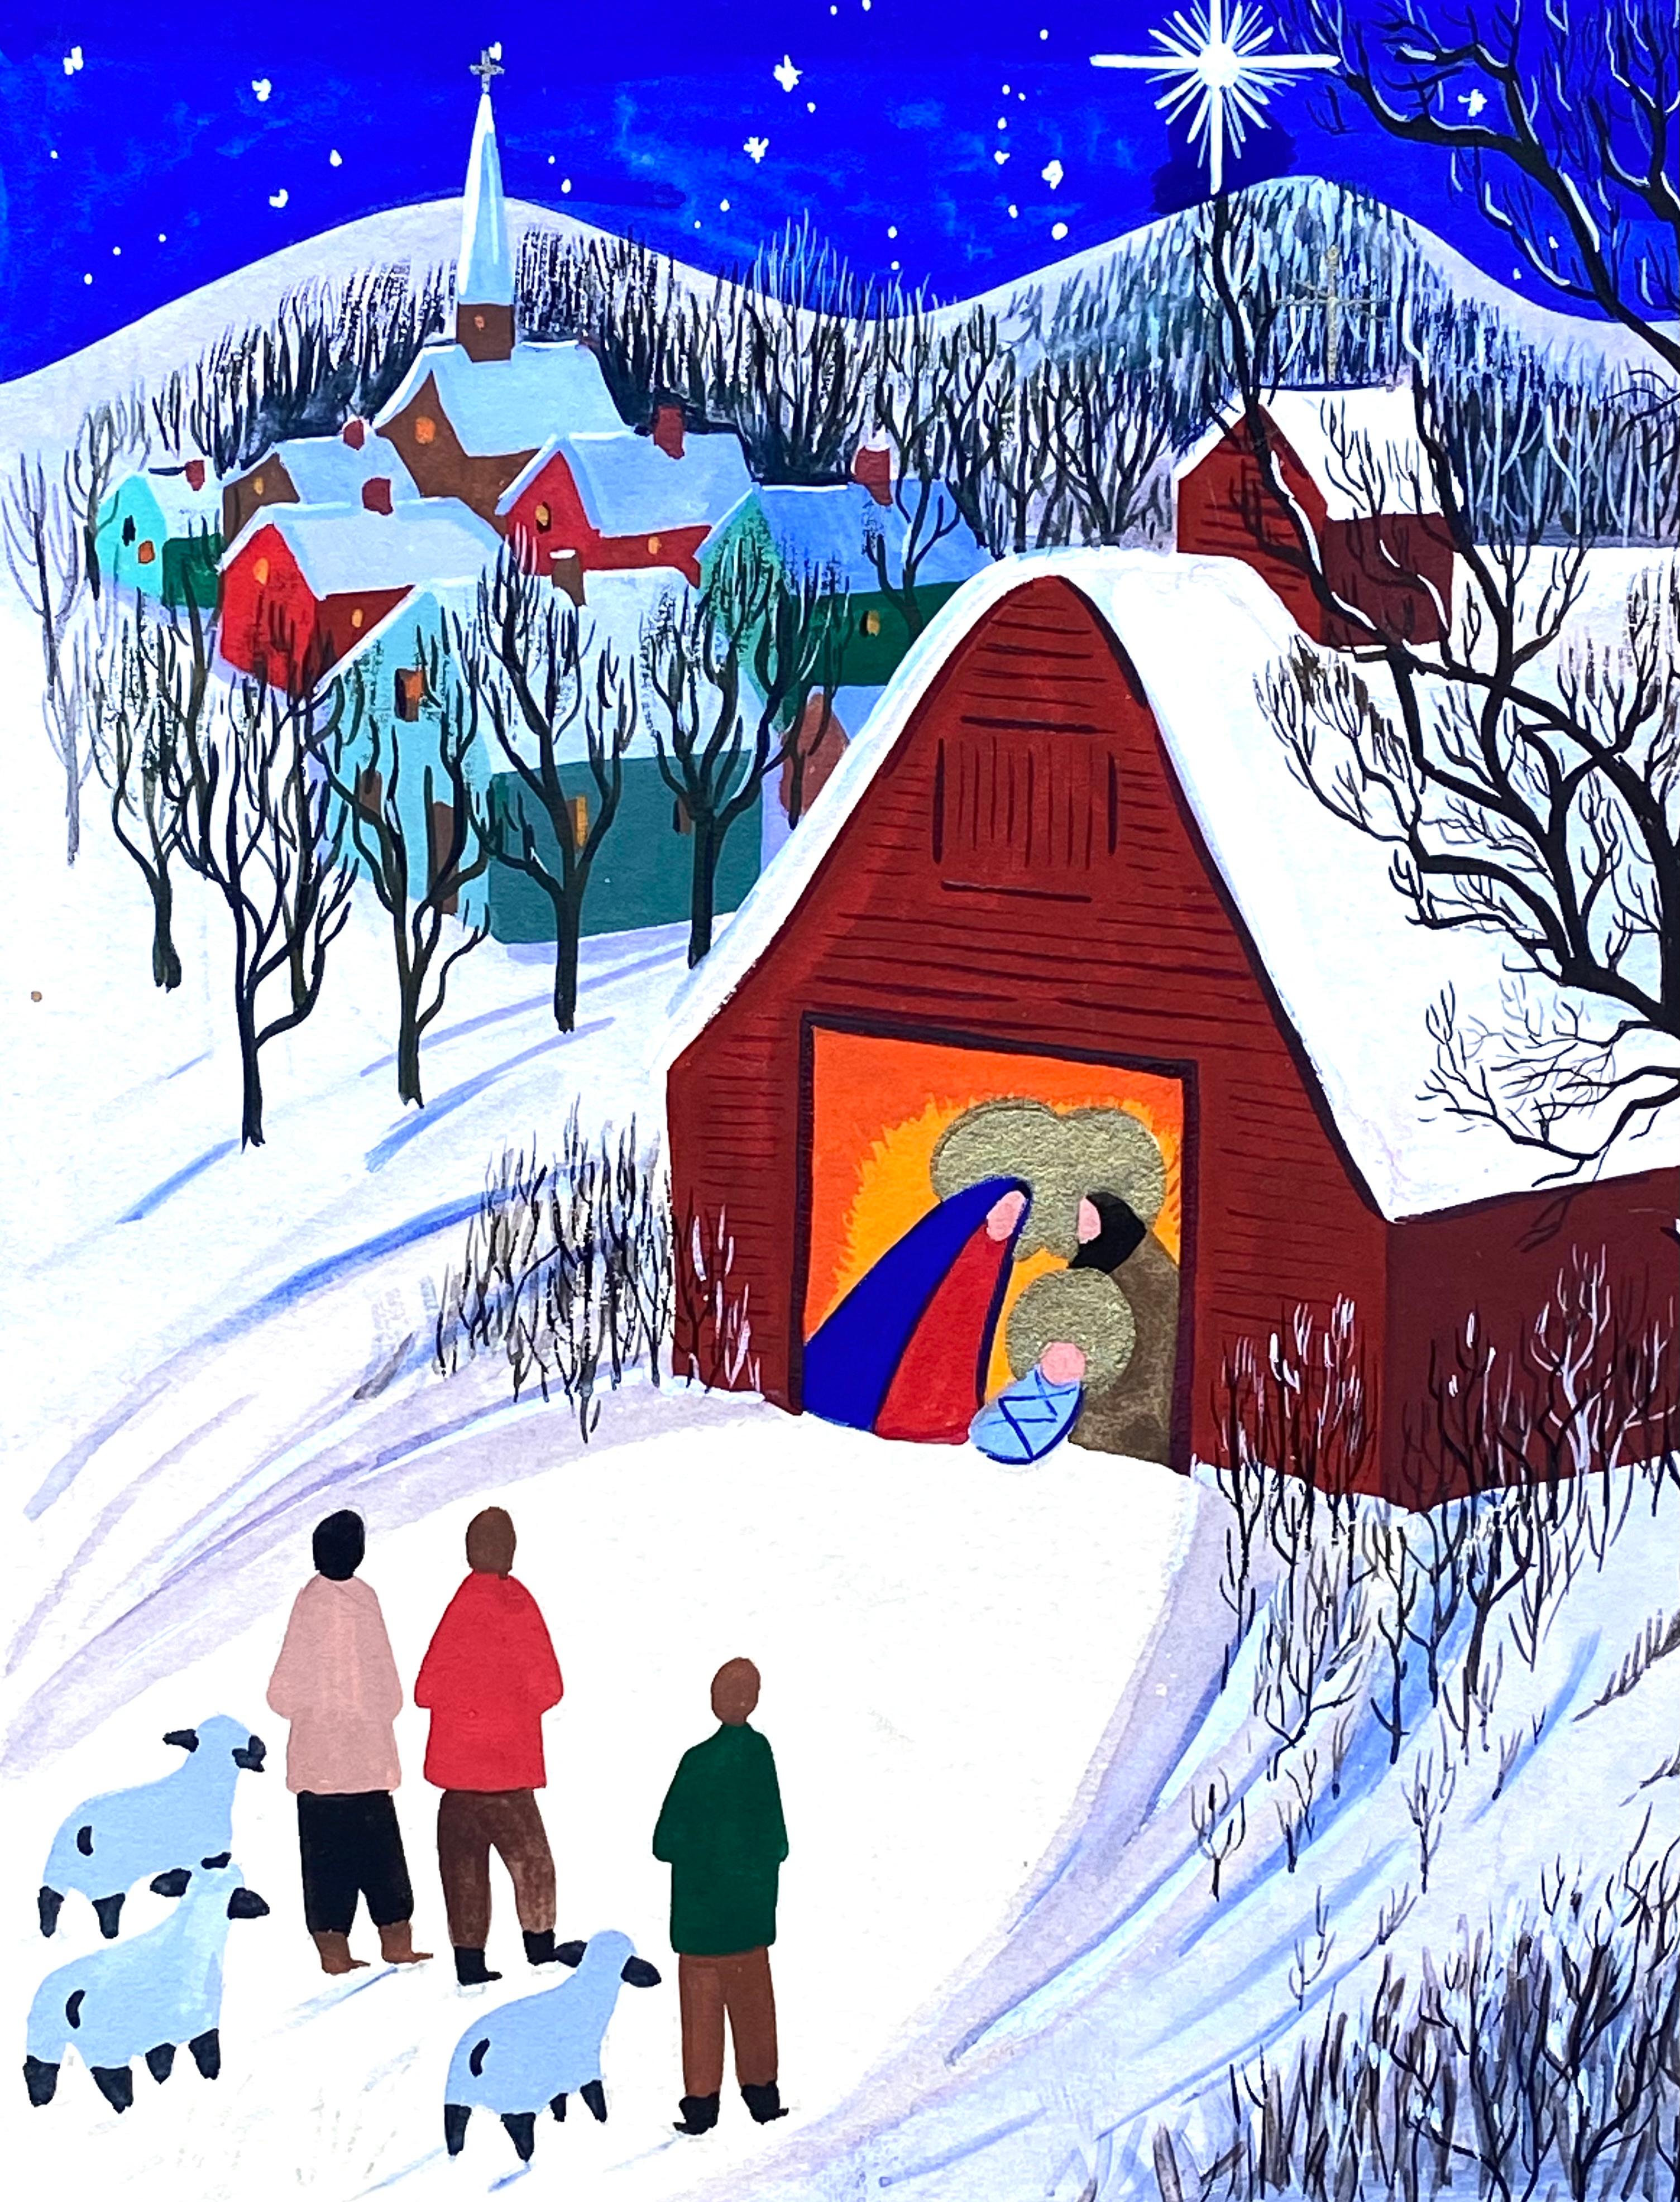 “Nativity” - Other Art Style Art by Unknown